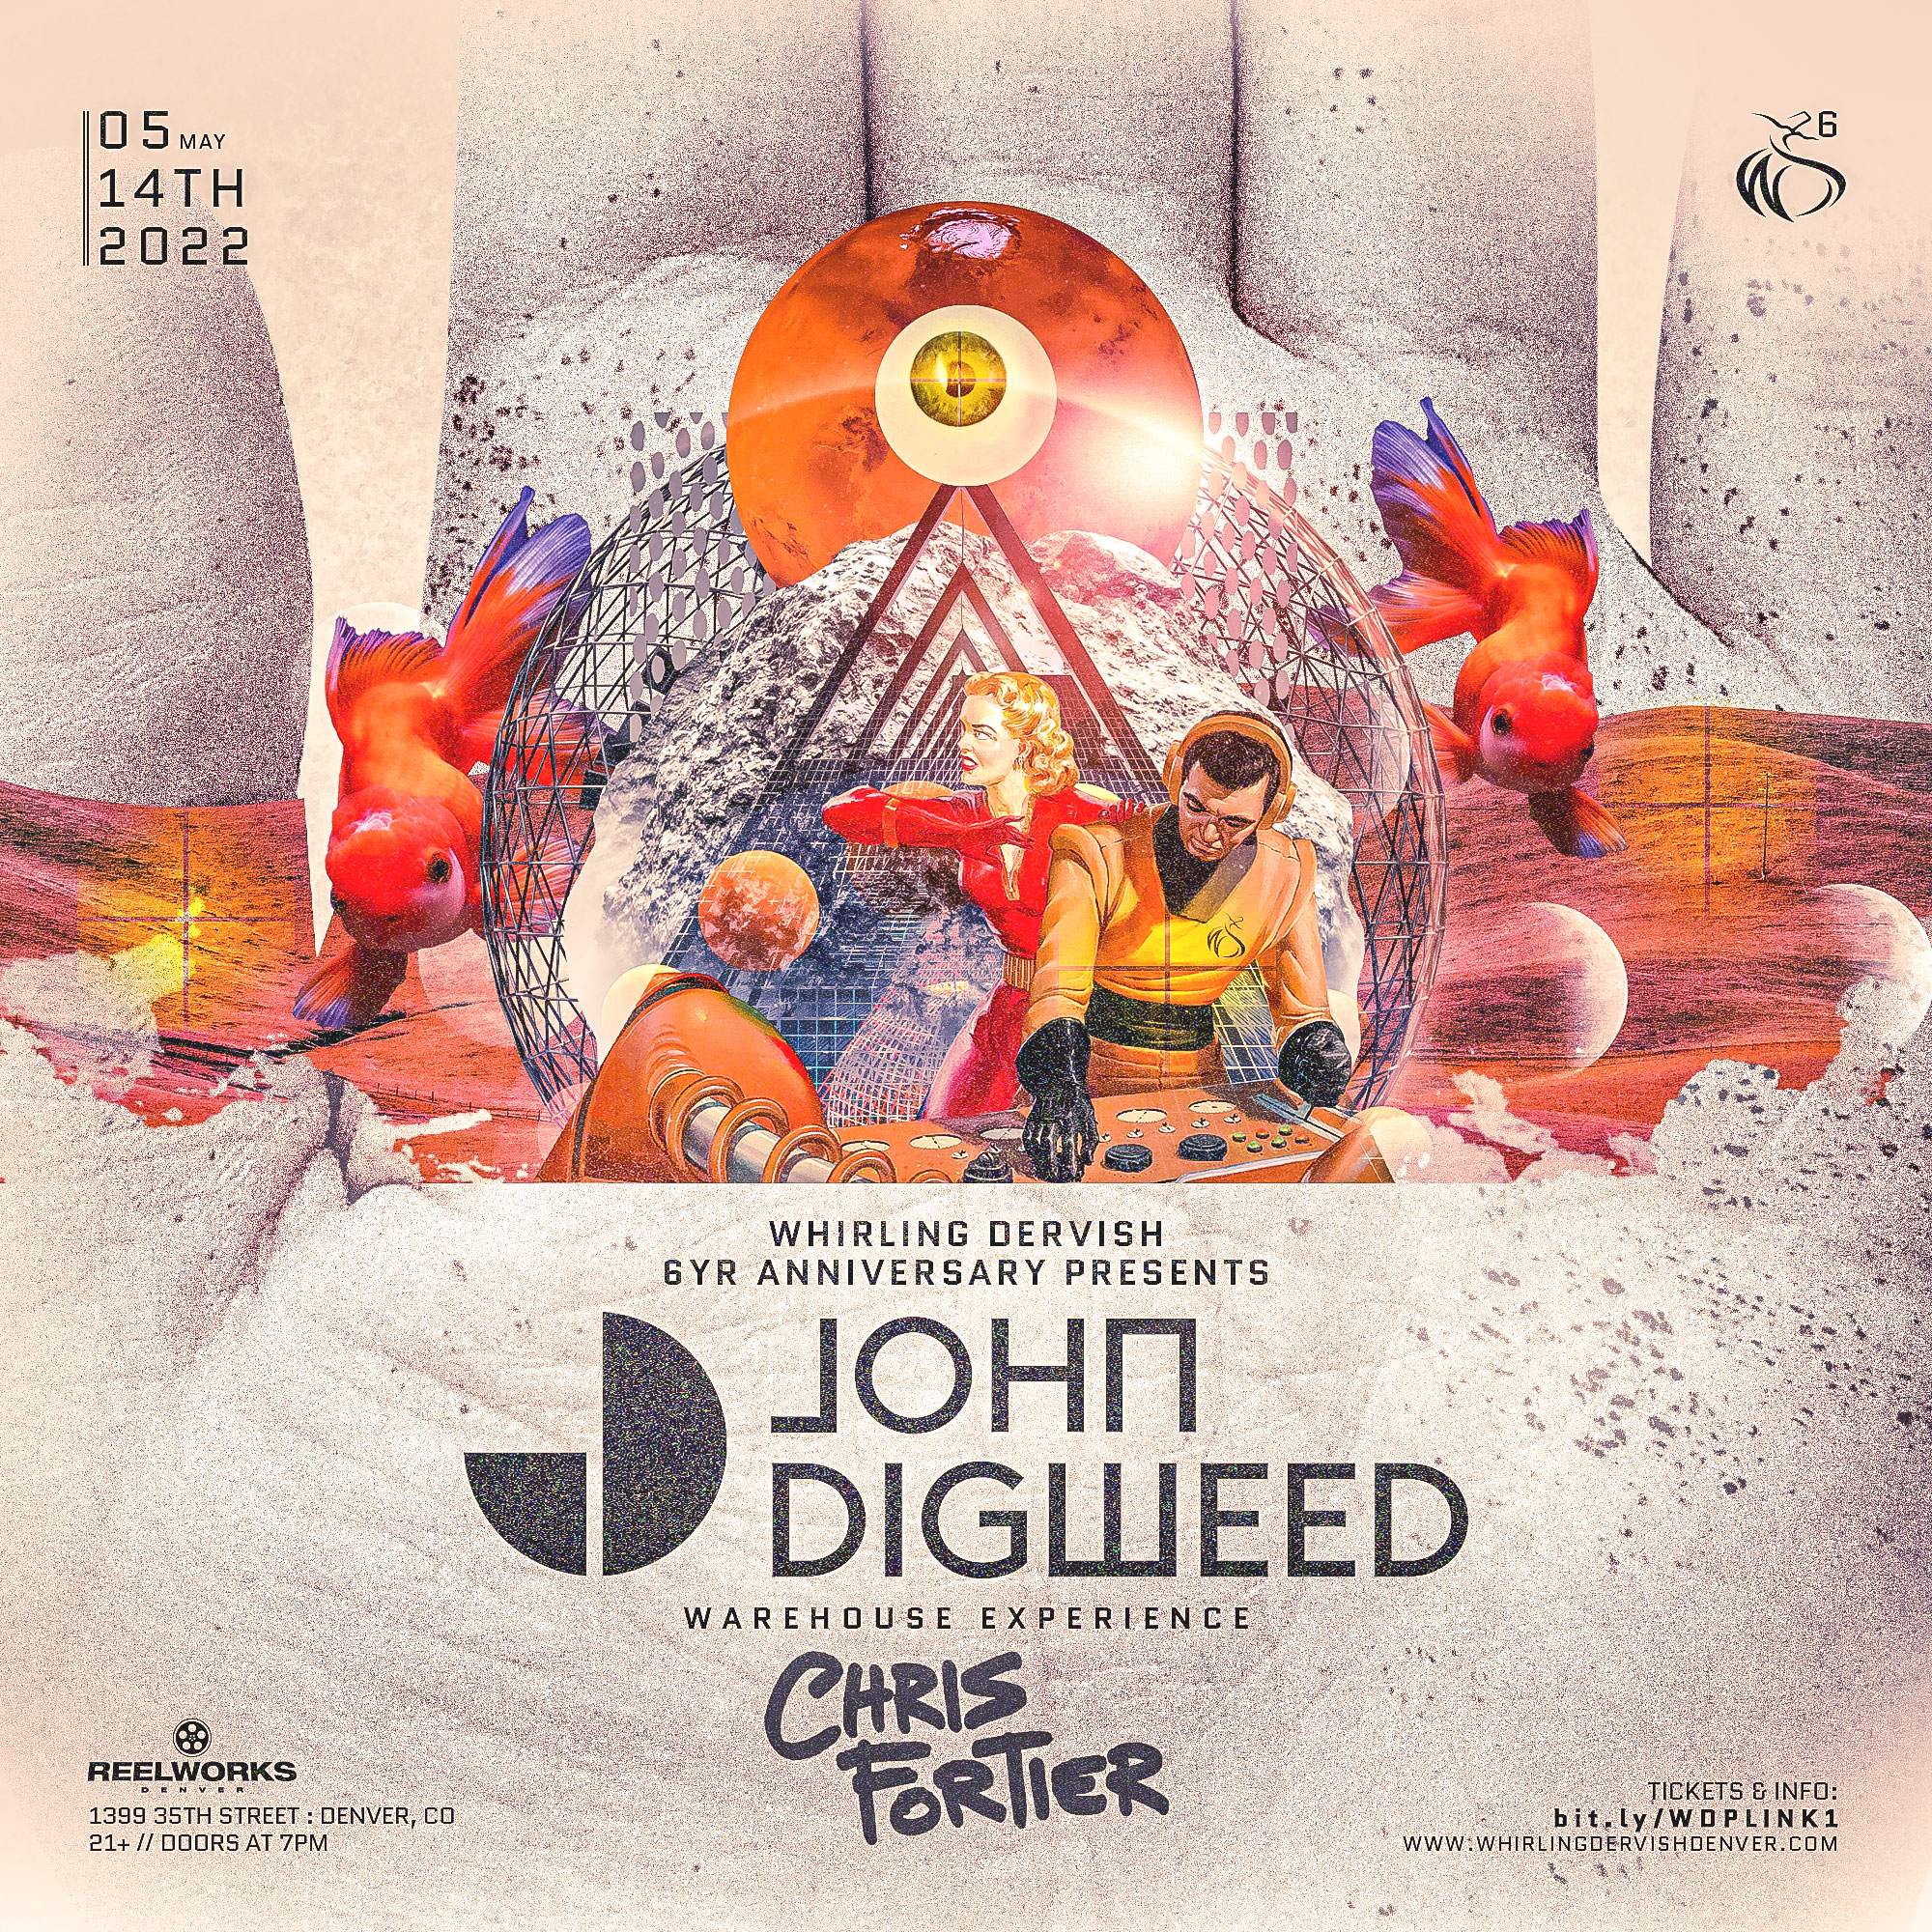 John Digweed, Chris Fortier Warehouse Experience - Whirling Dervish 6 Year Anniversary - フライヤー表